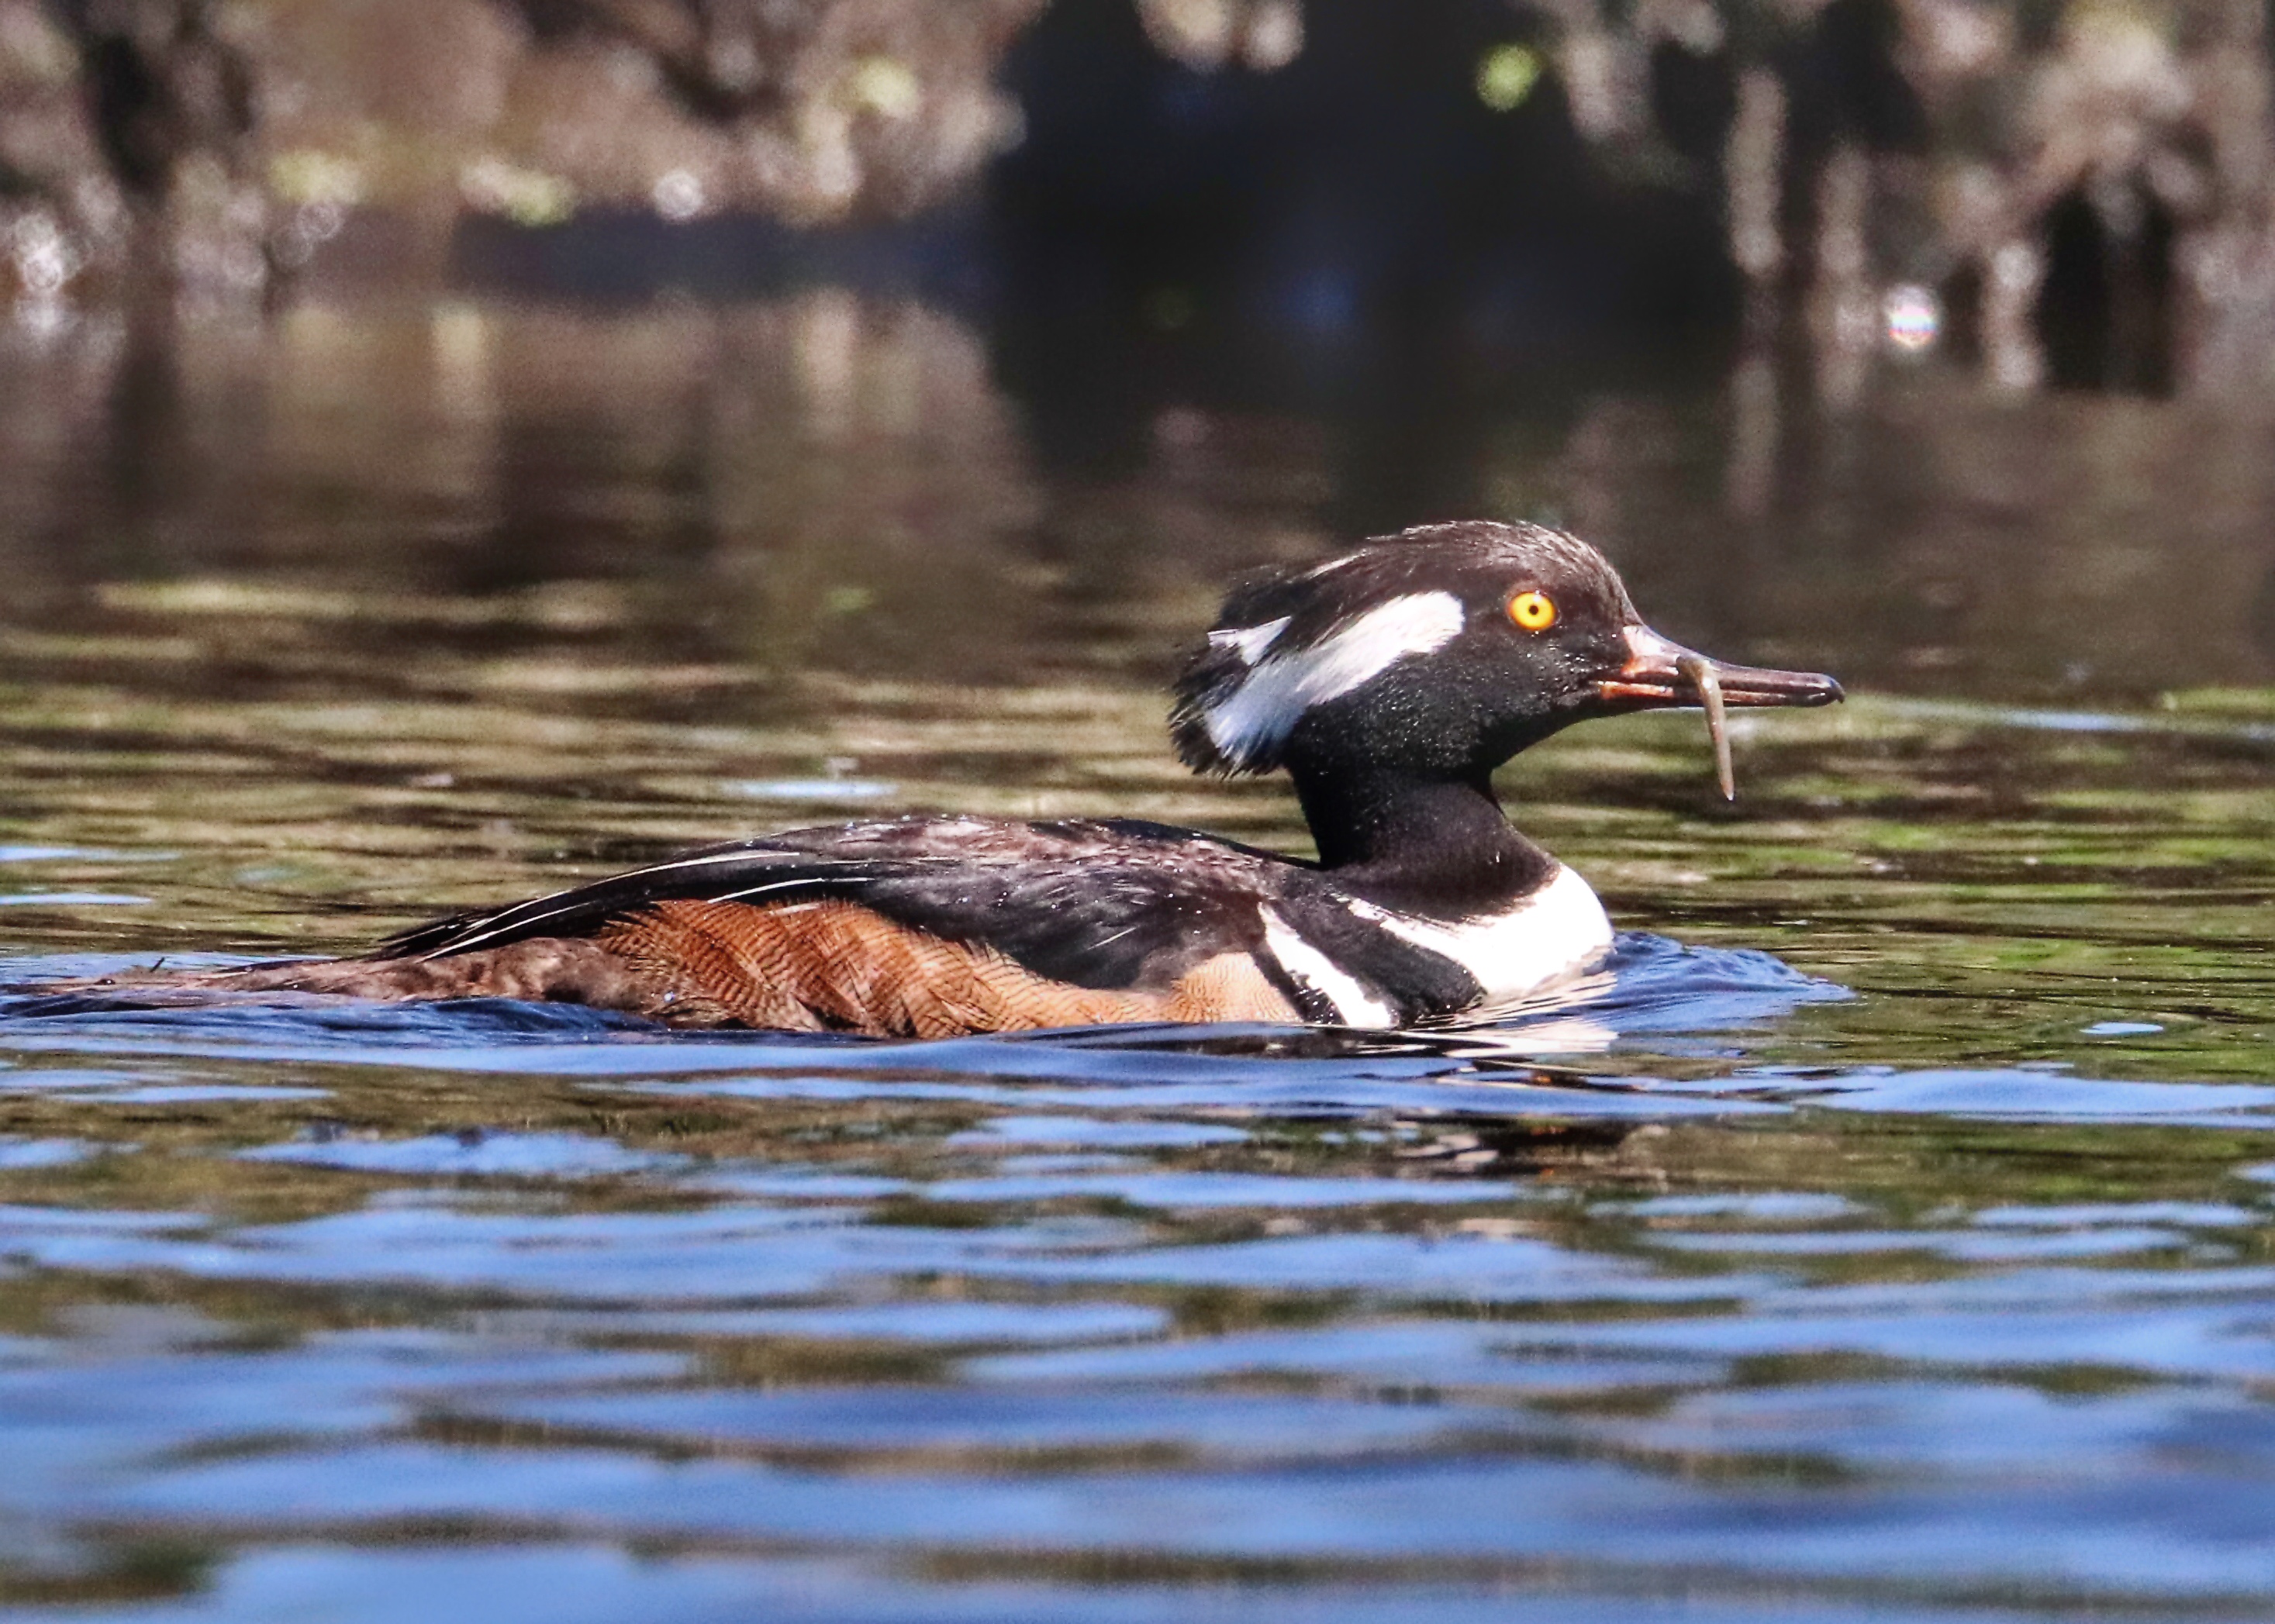 Hooded merganser swims with a small fish in its bill